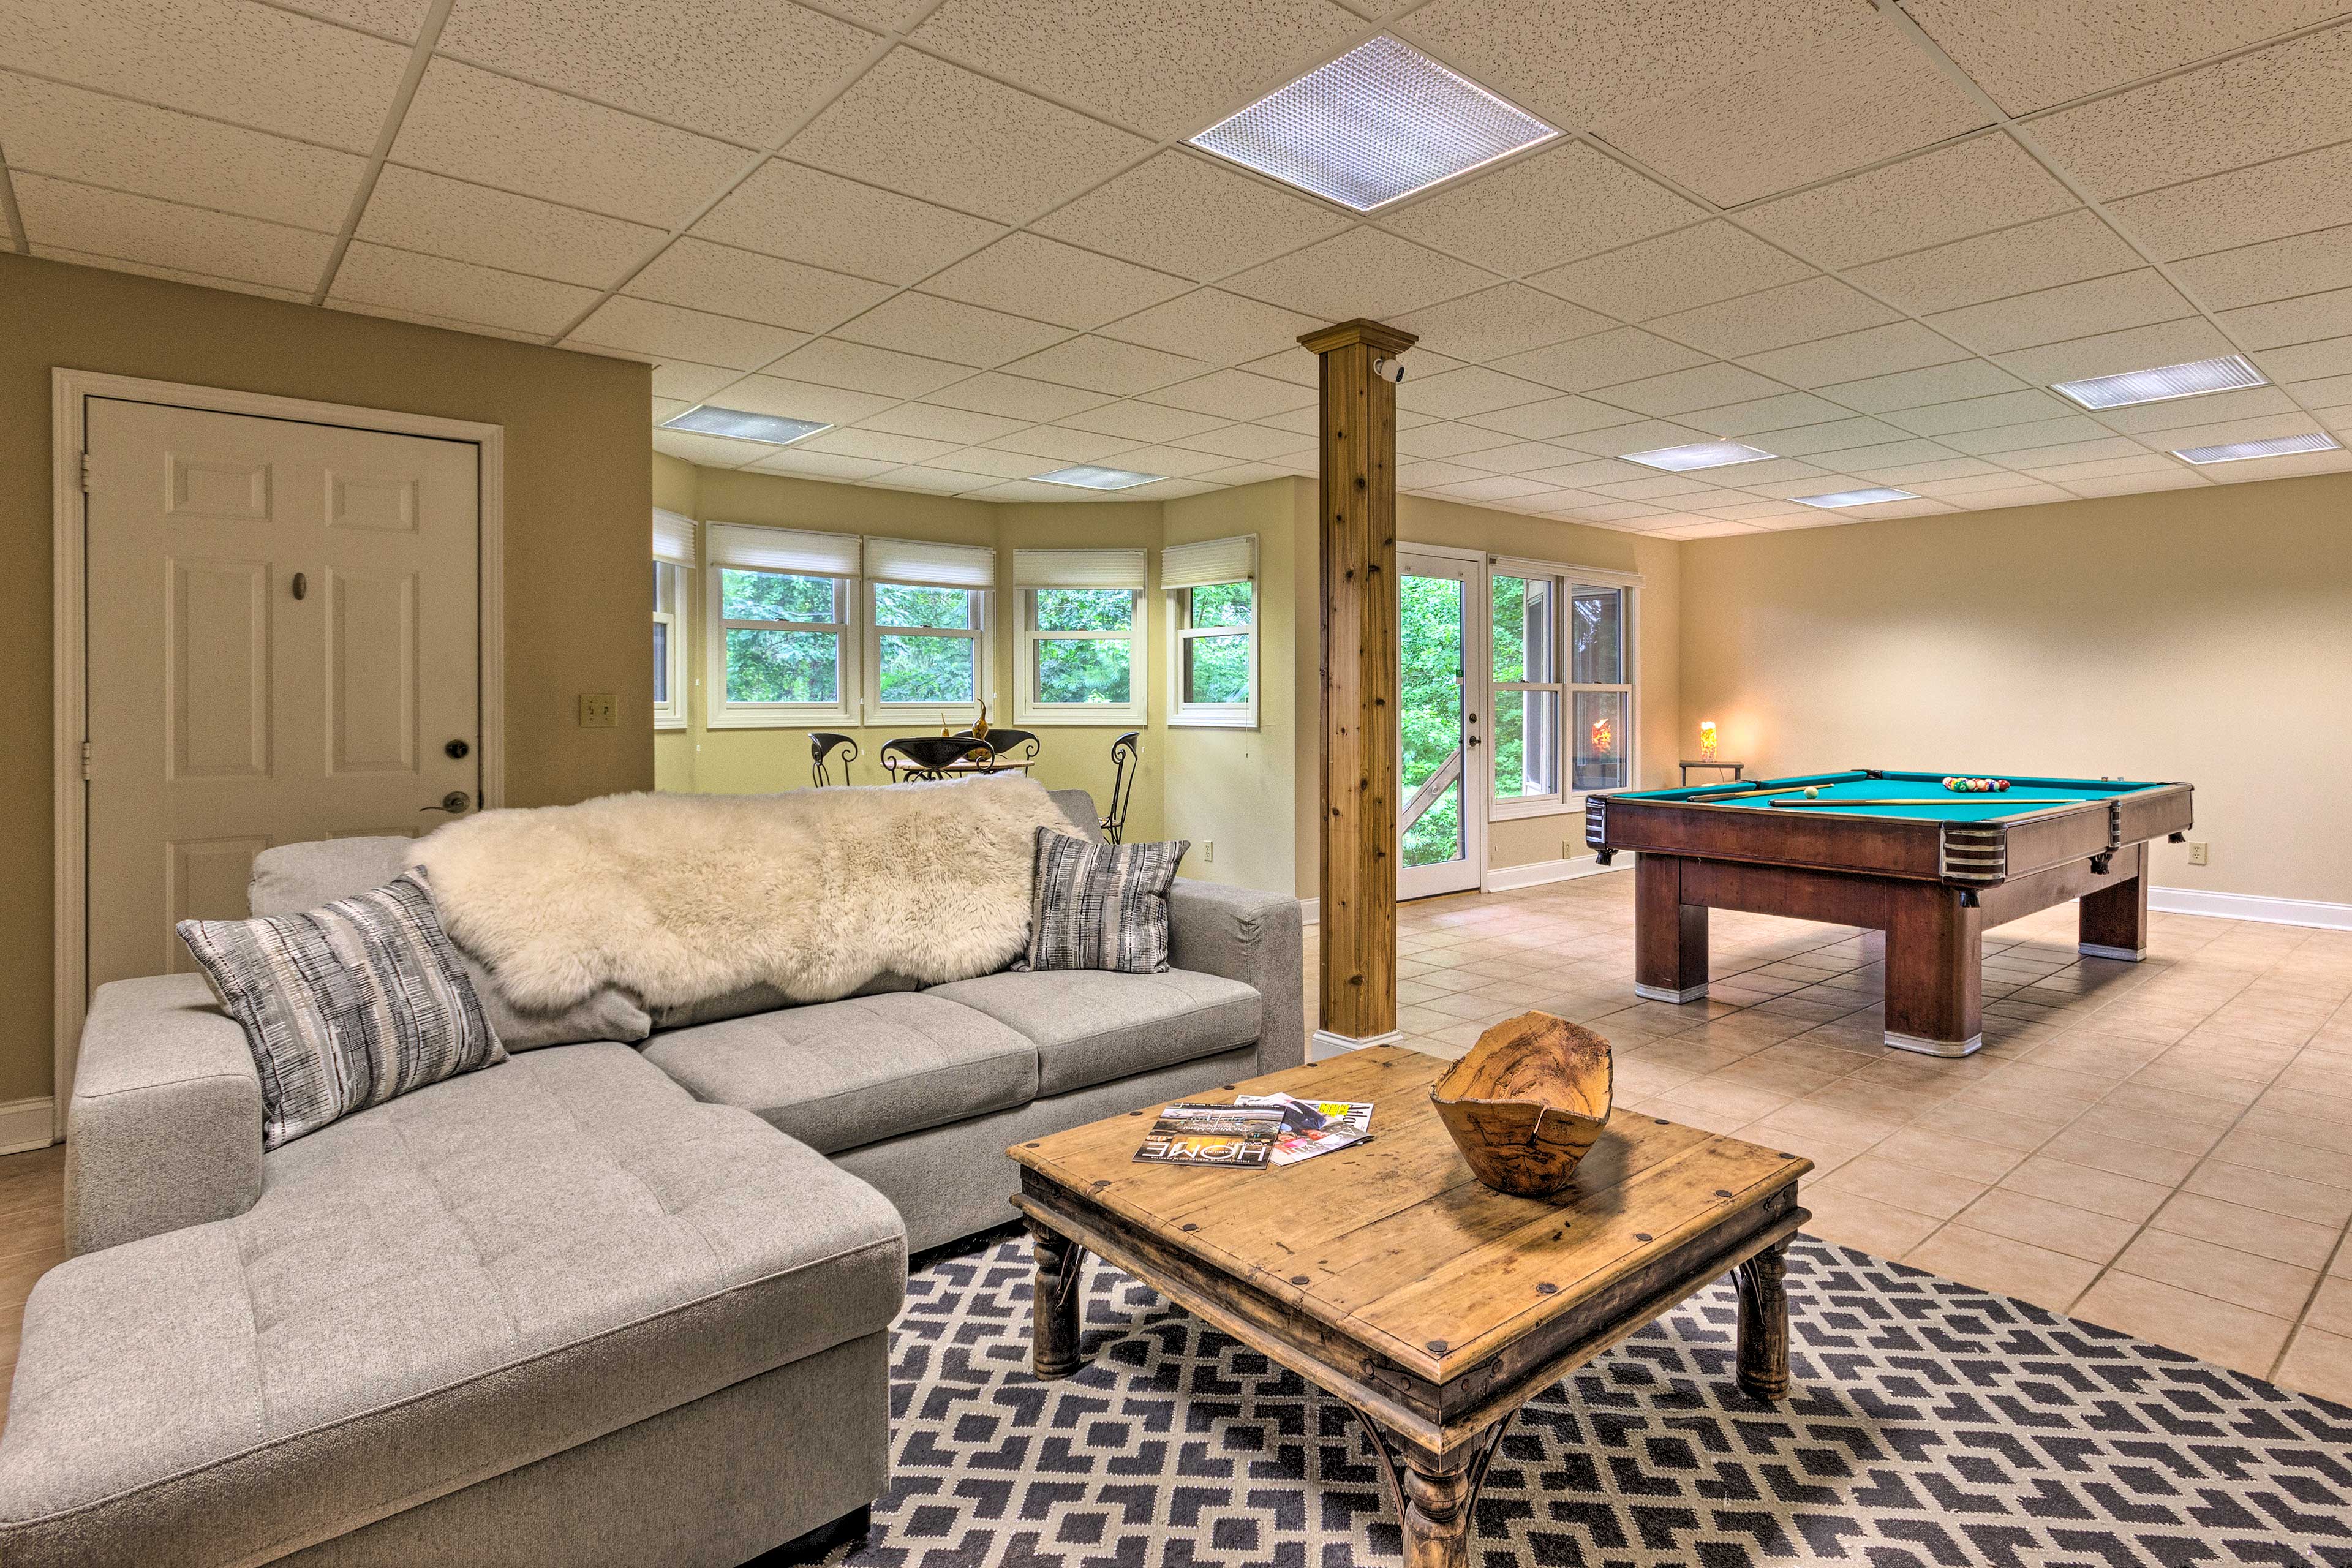 The game room is great for hanging out to shoot pool or play games.